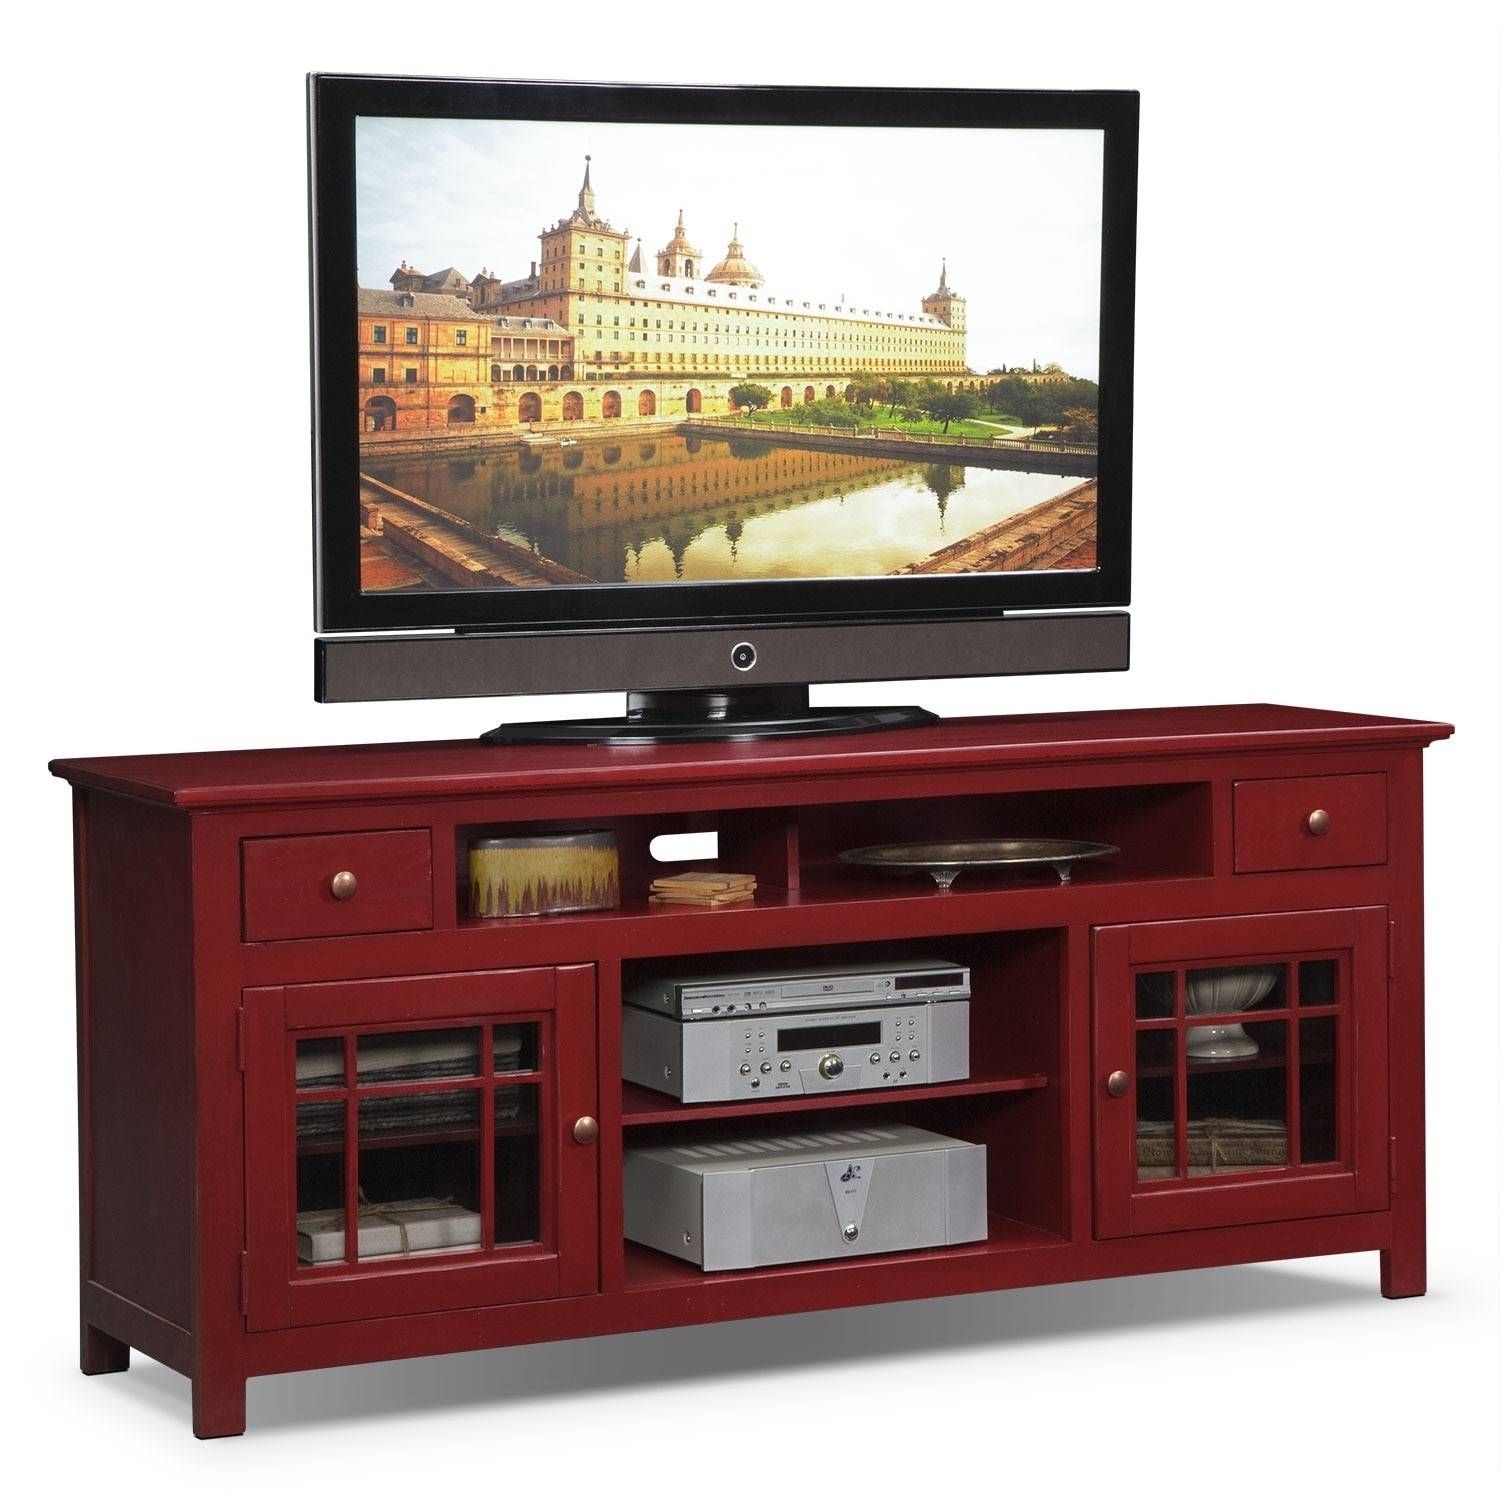 Merrick 74" Tv Stand – Red | Value City Furniture Regarding Red Tv Stands (View 1 of 15)